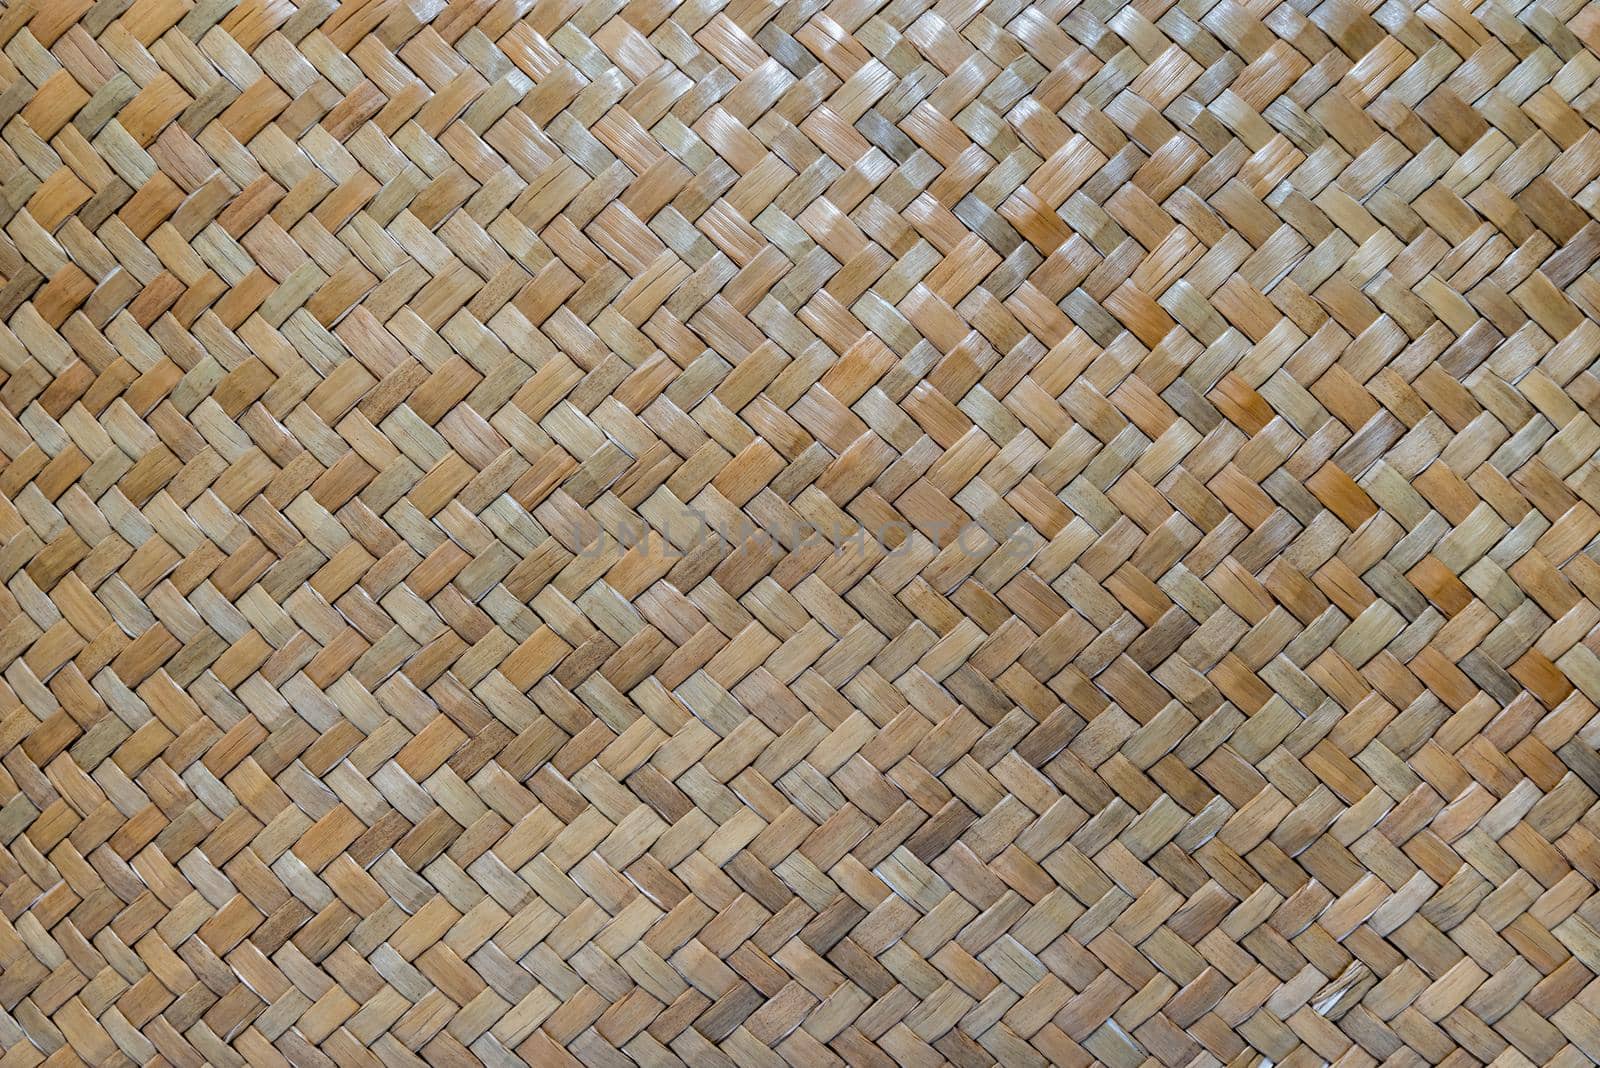 Abstract wicker texture of bamboo weaver which made of pieces of bamboo tiles weaved together. Bamboo wicker basket texture.